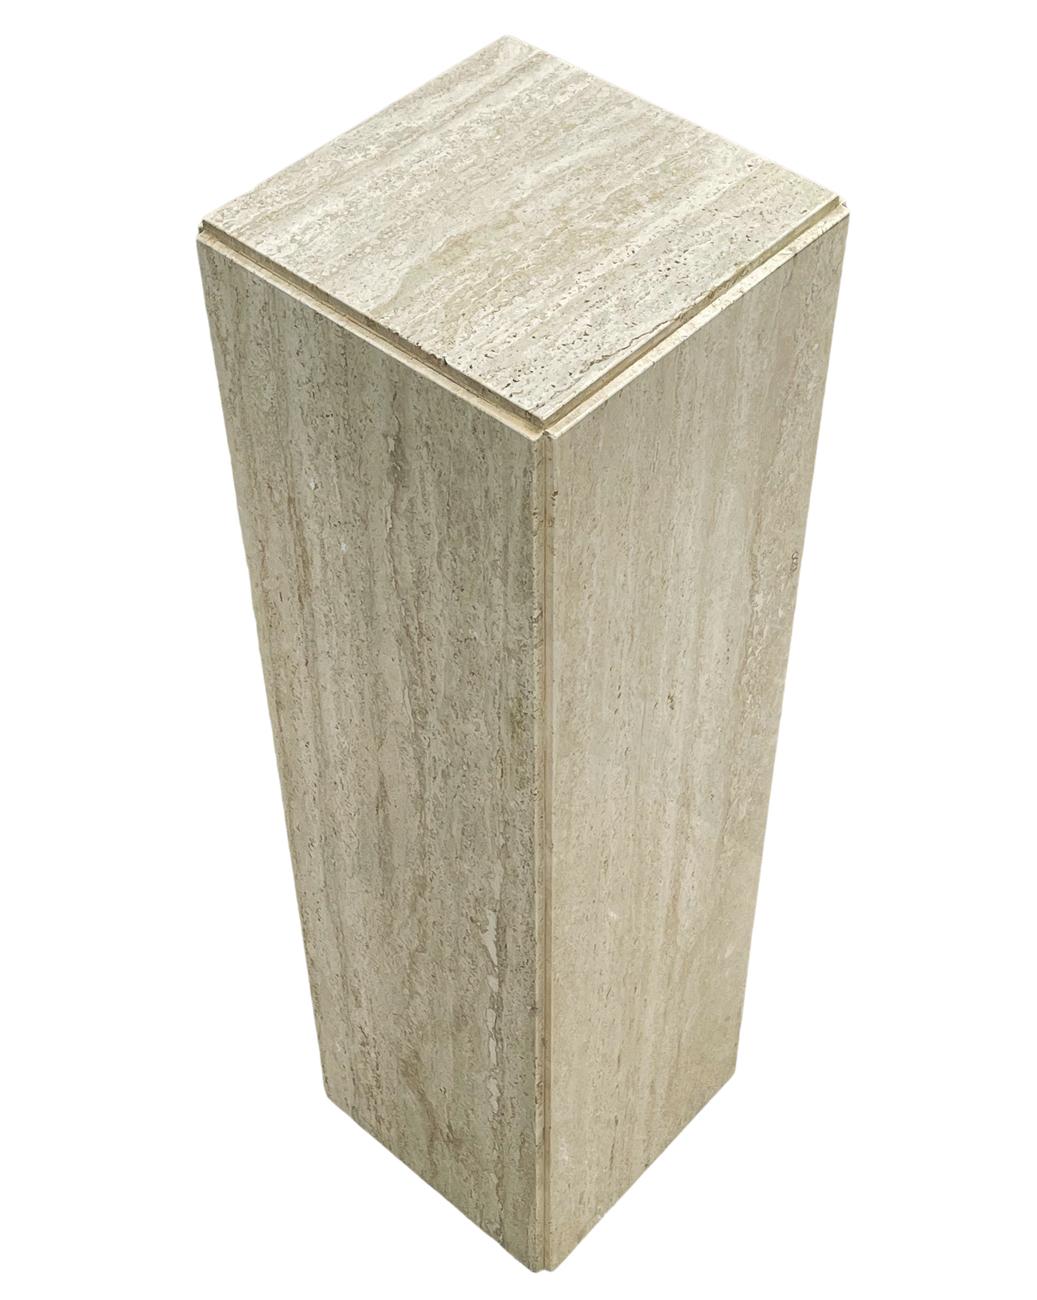 A simple modern pair of pedestals from Italy, circa 1980's. These consist of solid travertine slabs. Very heavy and beautiful pieces. Price includes the pair.